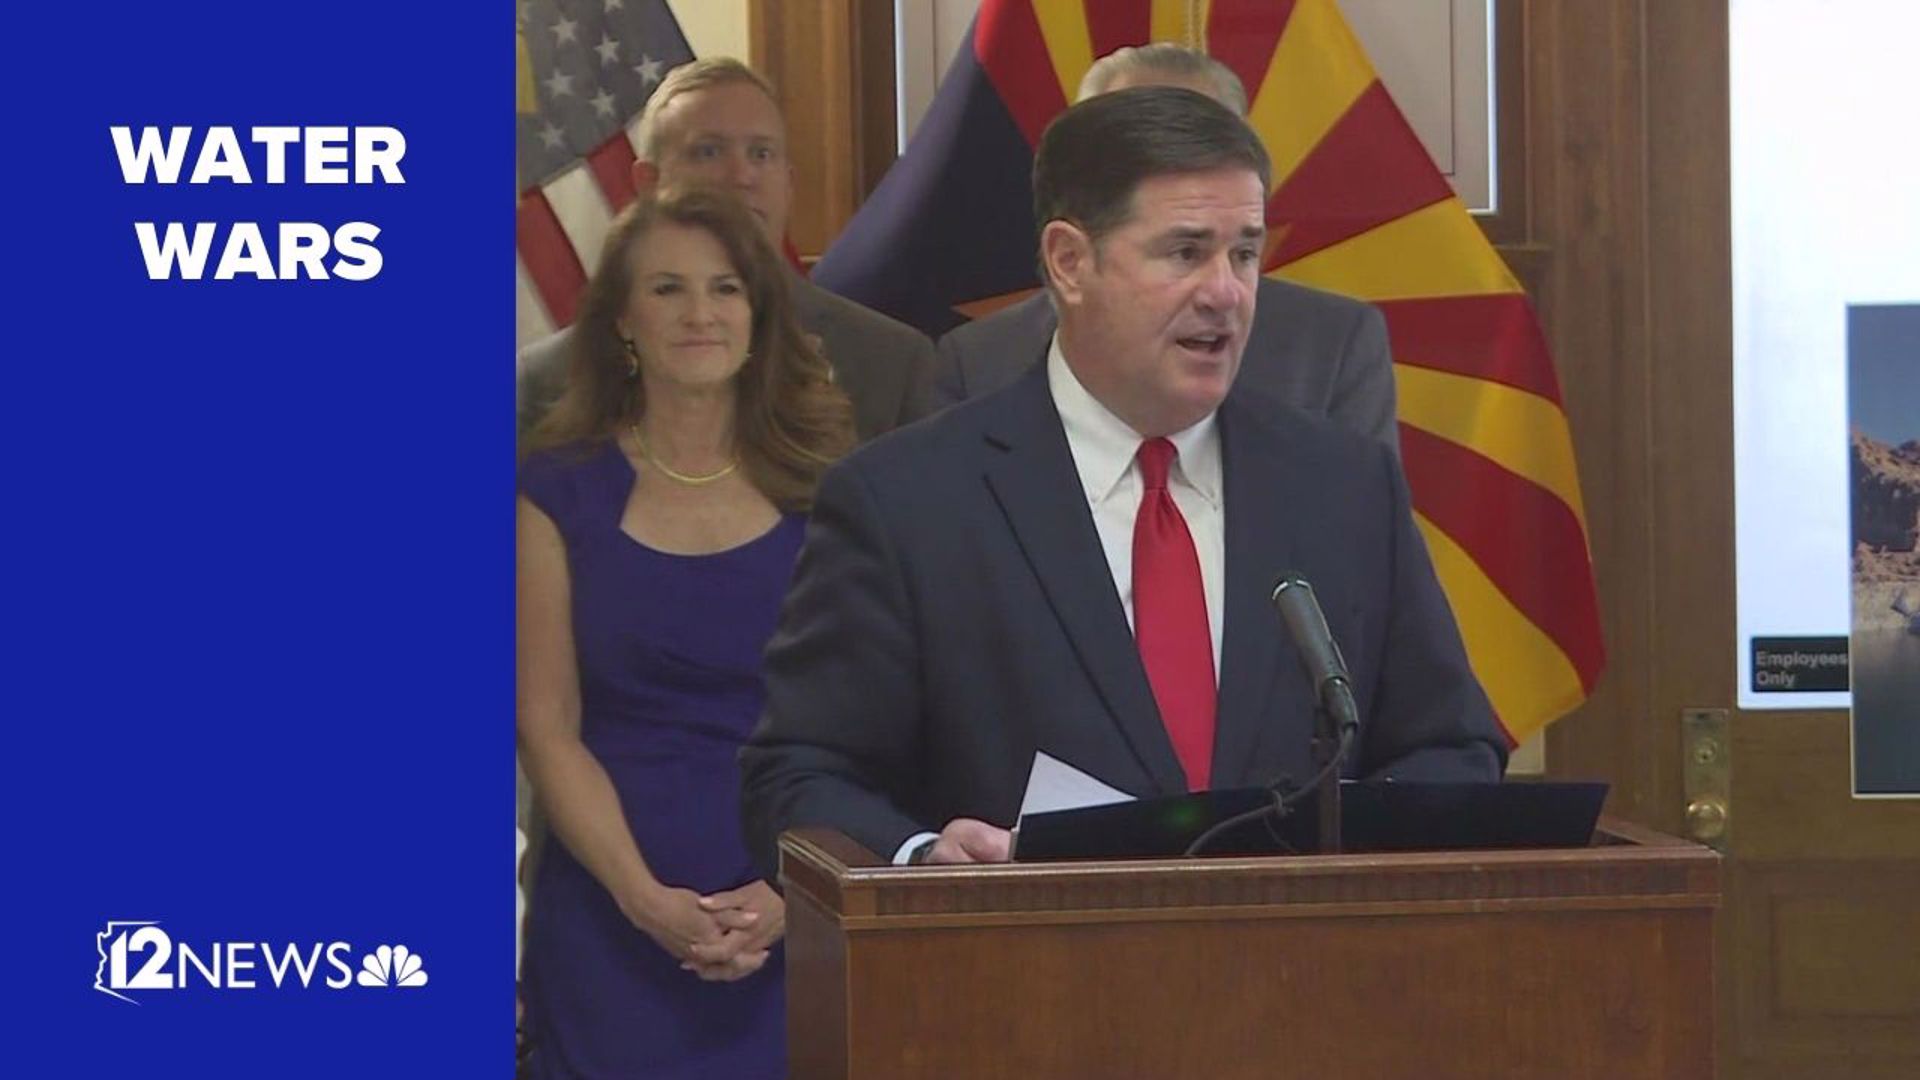 Doug Ducey signed legislation that will provide $1.2 billion over three years to boost long-term water supplies for Arizona and implement conservation efforts.